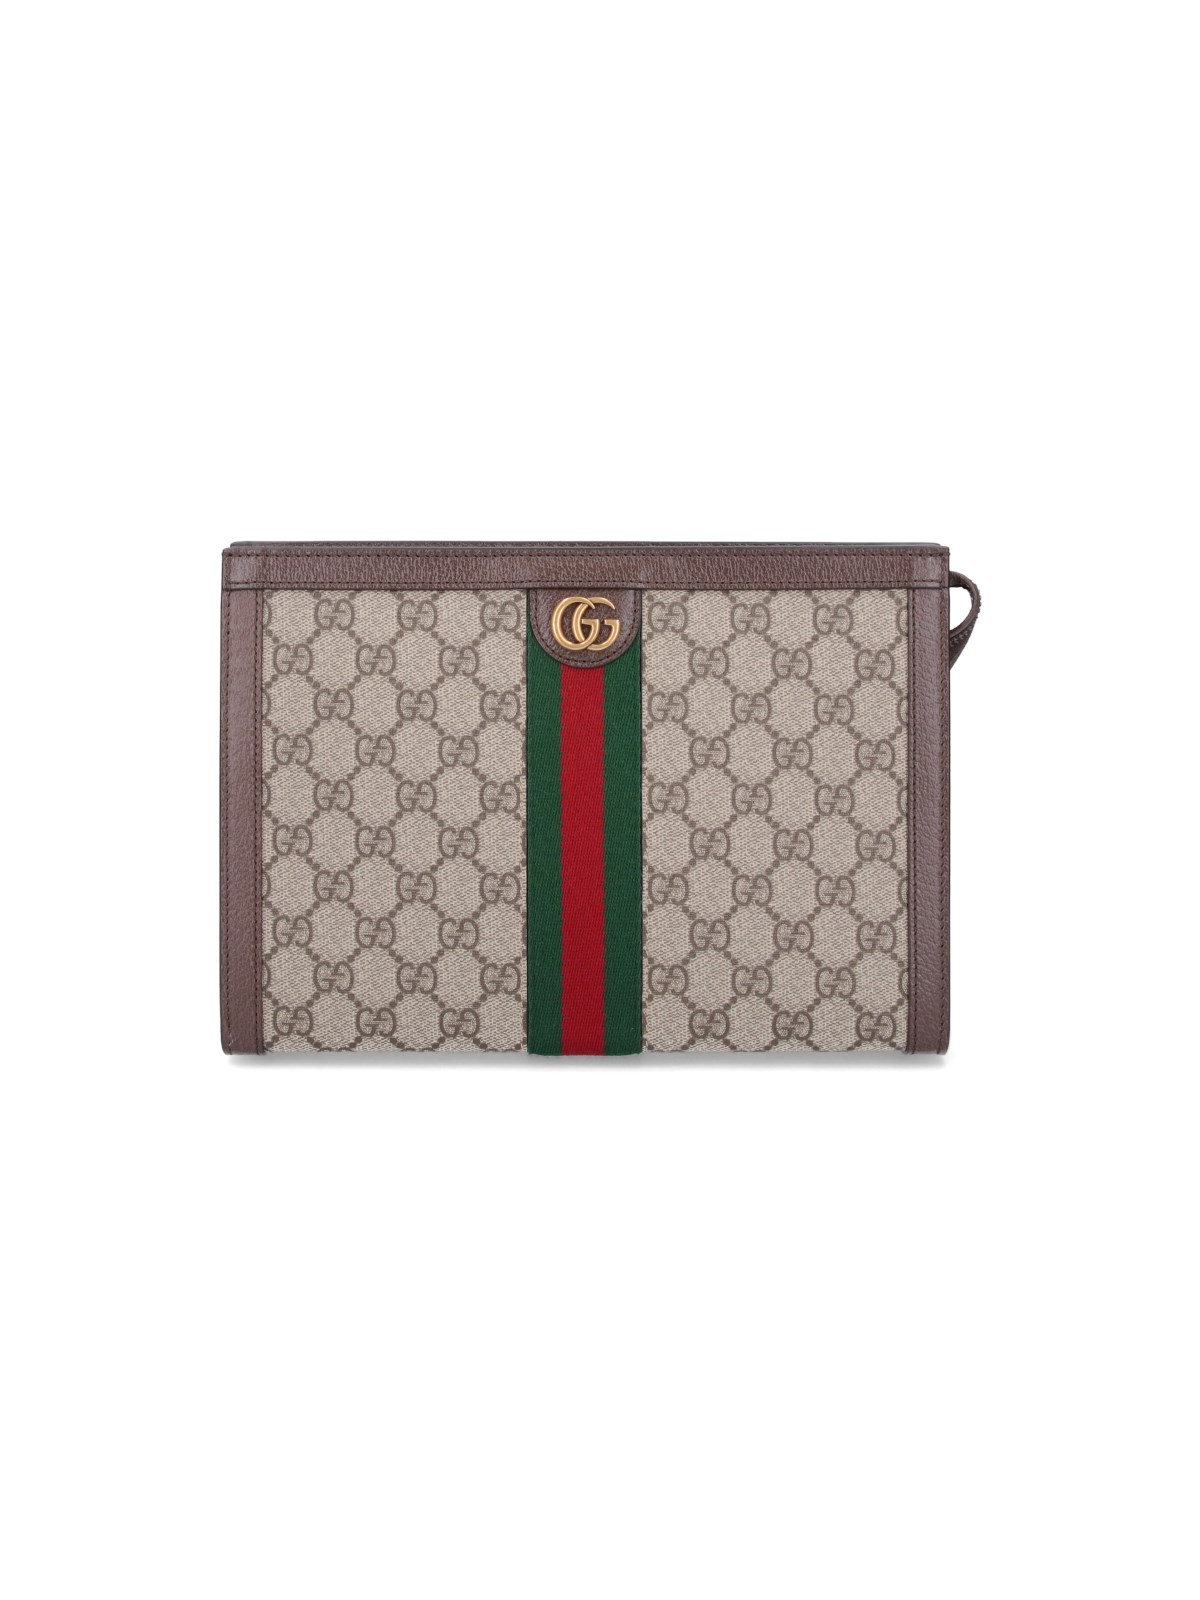 Gucci "ophidia" Pouch In Brown